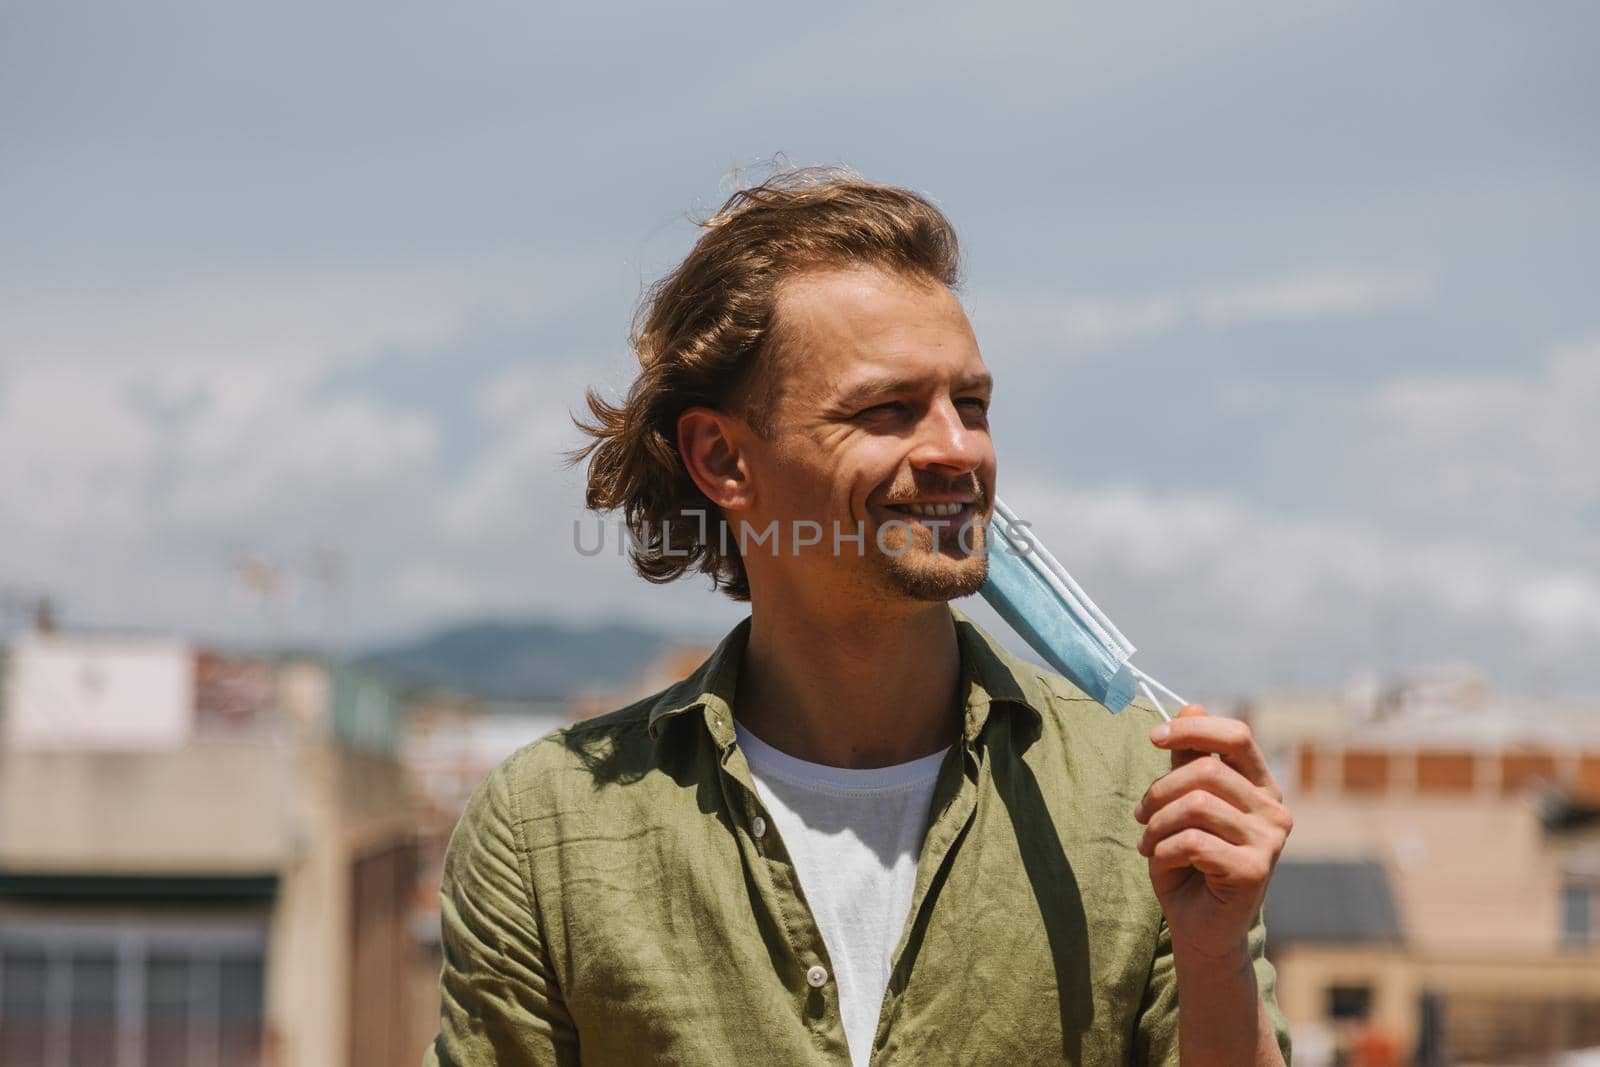 End of coronavirus pandemic. European man is happy to take off medical mask on sunny day with city and sky background. by apavlin